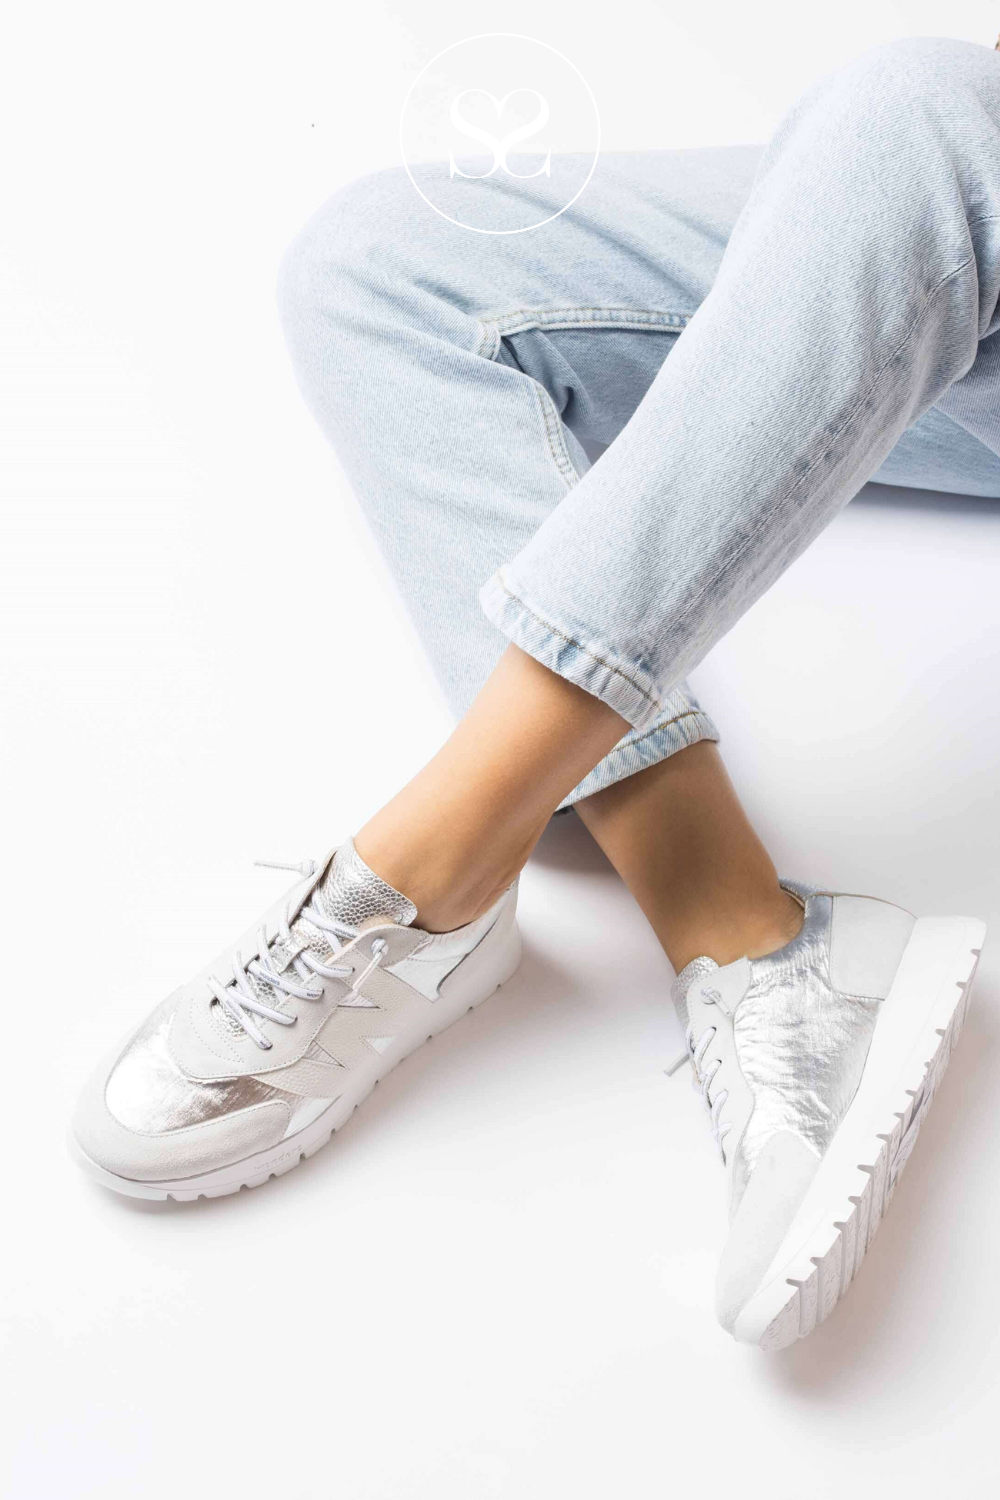 WONDERS A-2464 WHITE SILVER FLATFORM WEDGE TRAINERS WITH ELASTICATED LACES AND WHITE WONDERS BRANDING ON THE SIDE